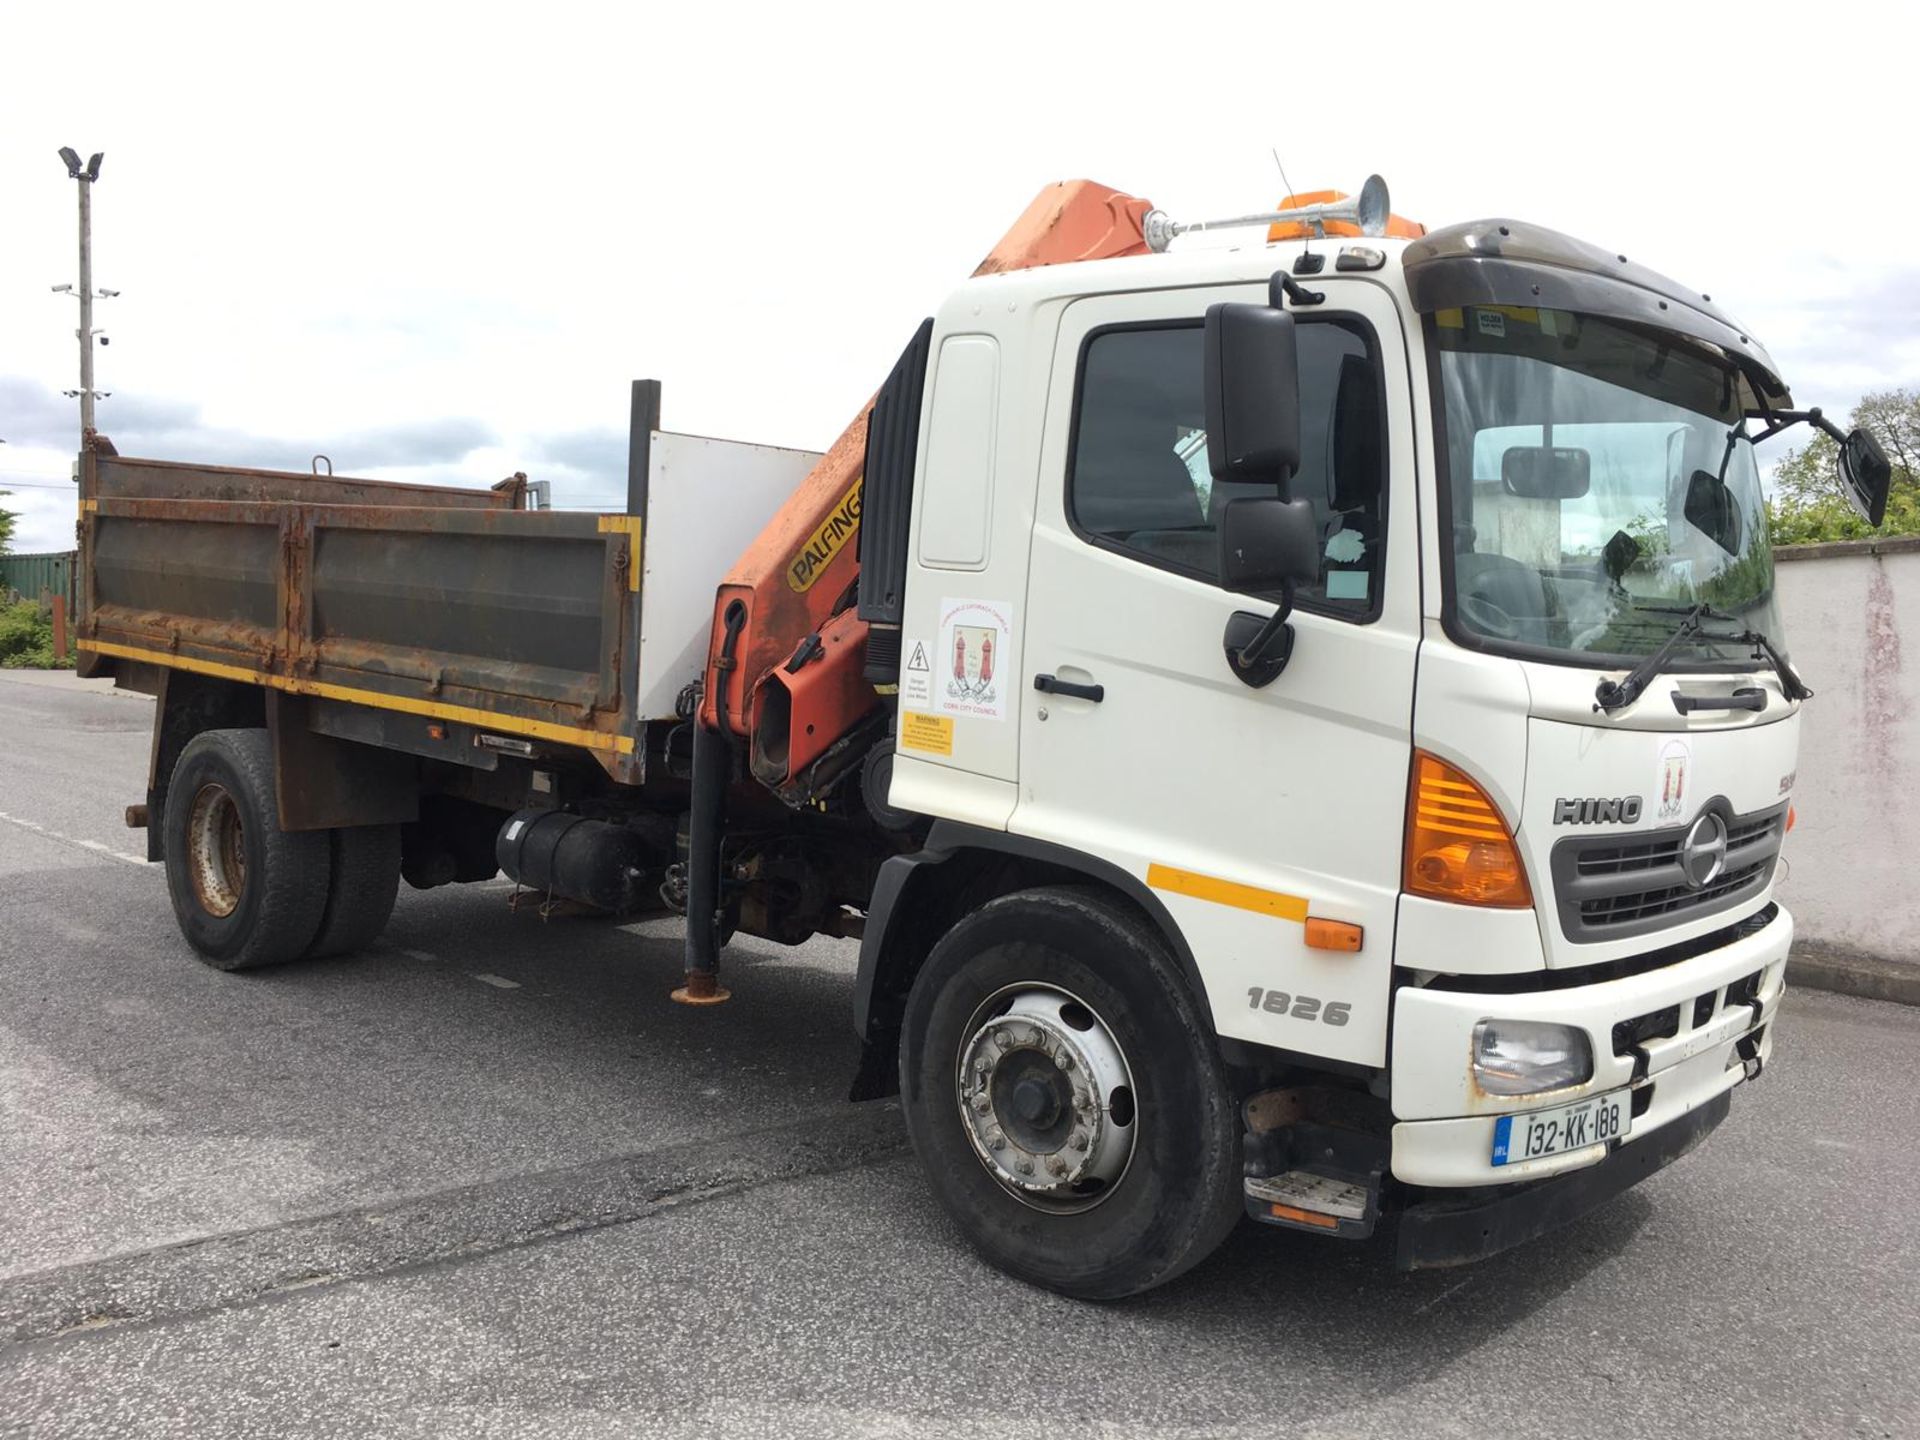 132KK188 UNRESERVED 2013 Hino 1826 18T Tipper - Image 2 of 9